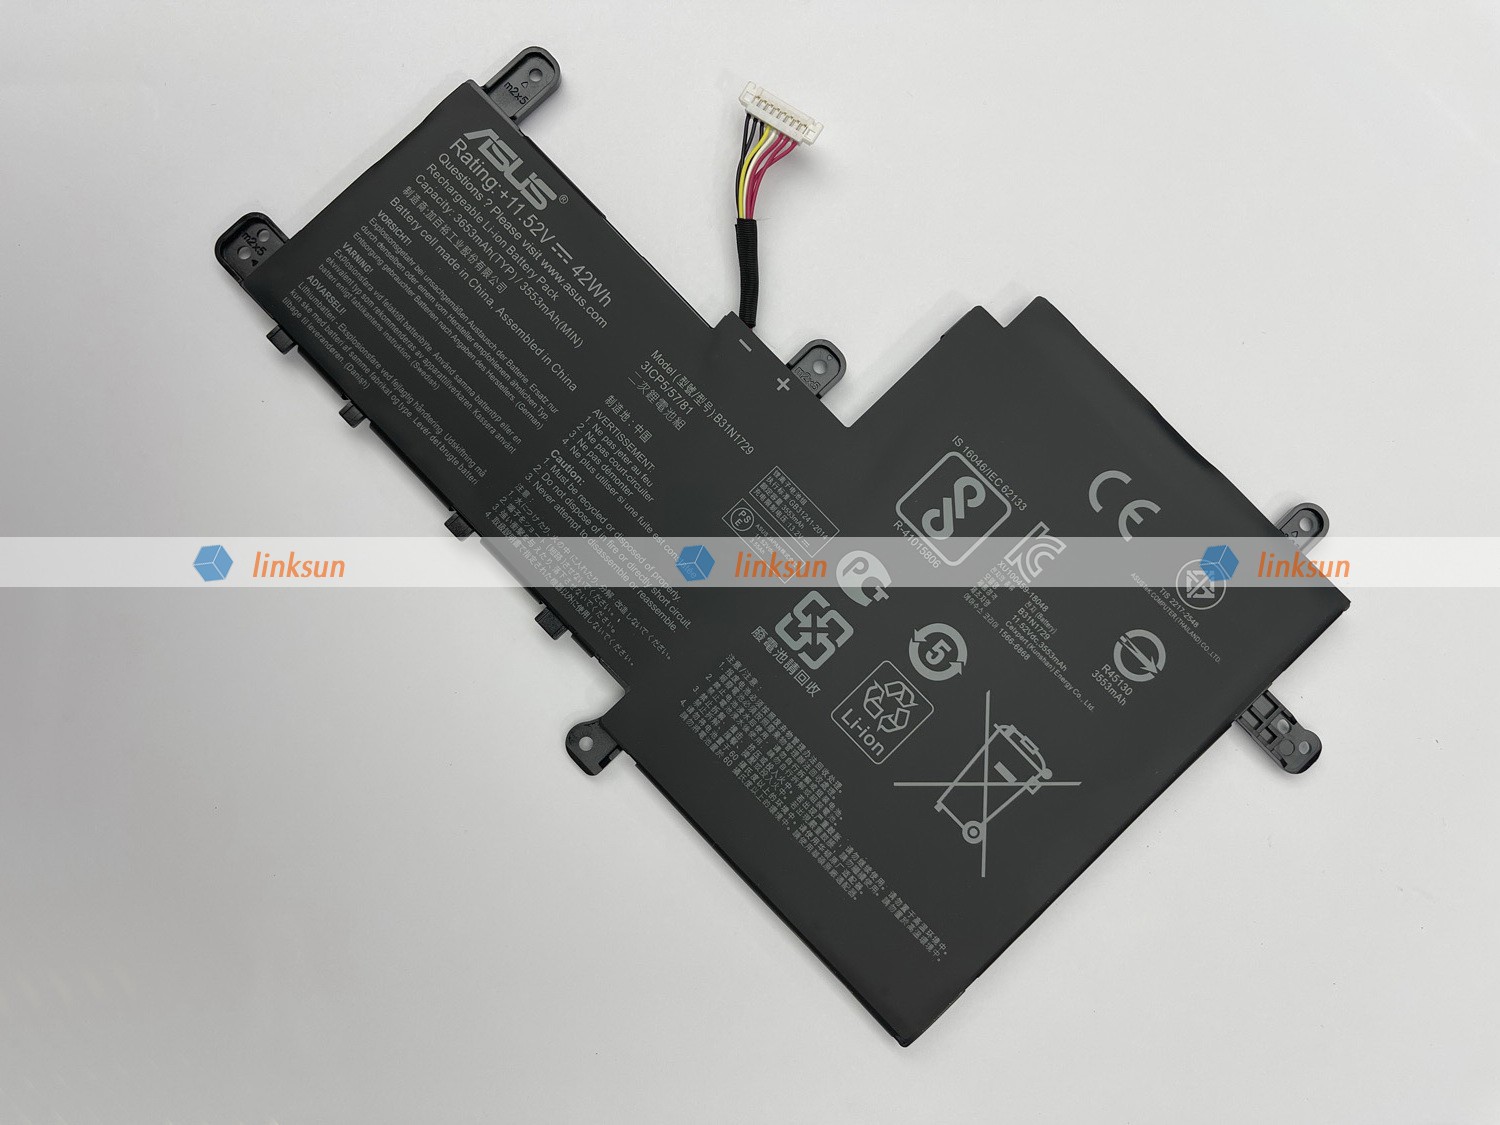 B31N1729 battery inclined